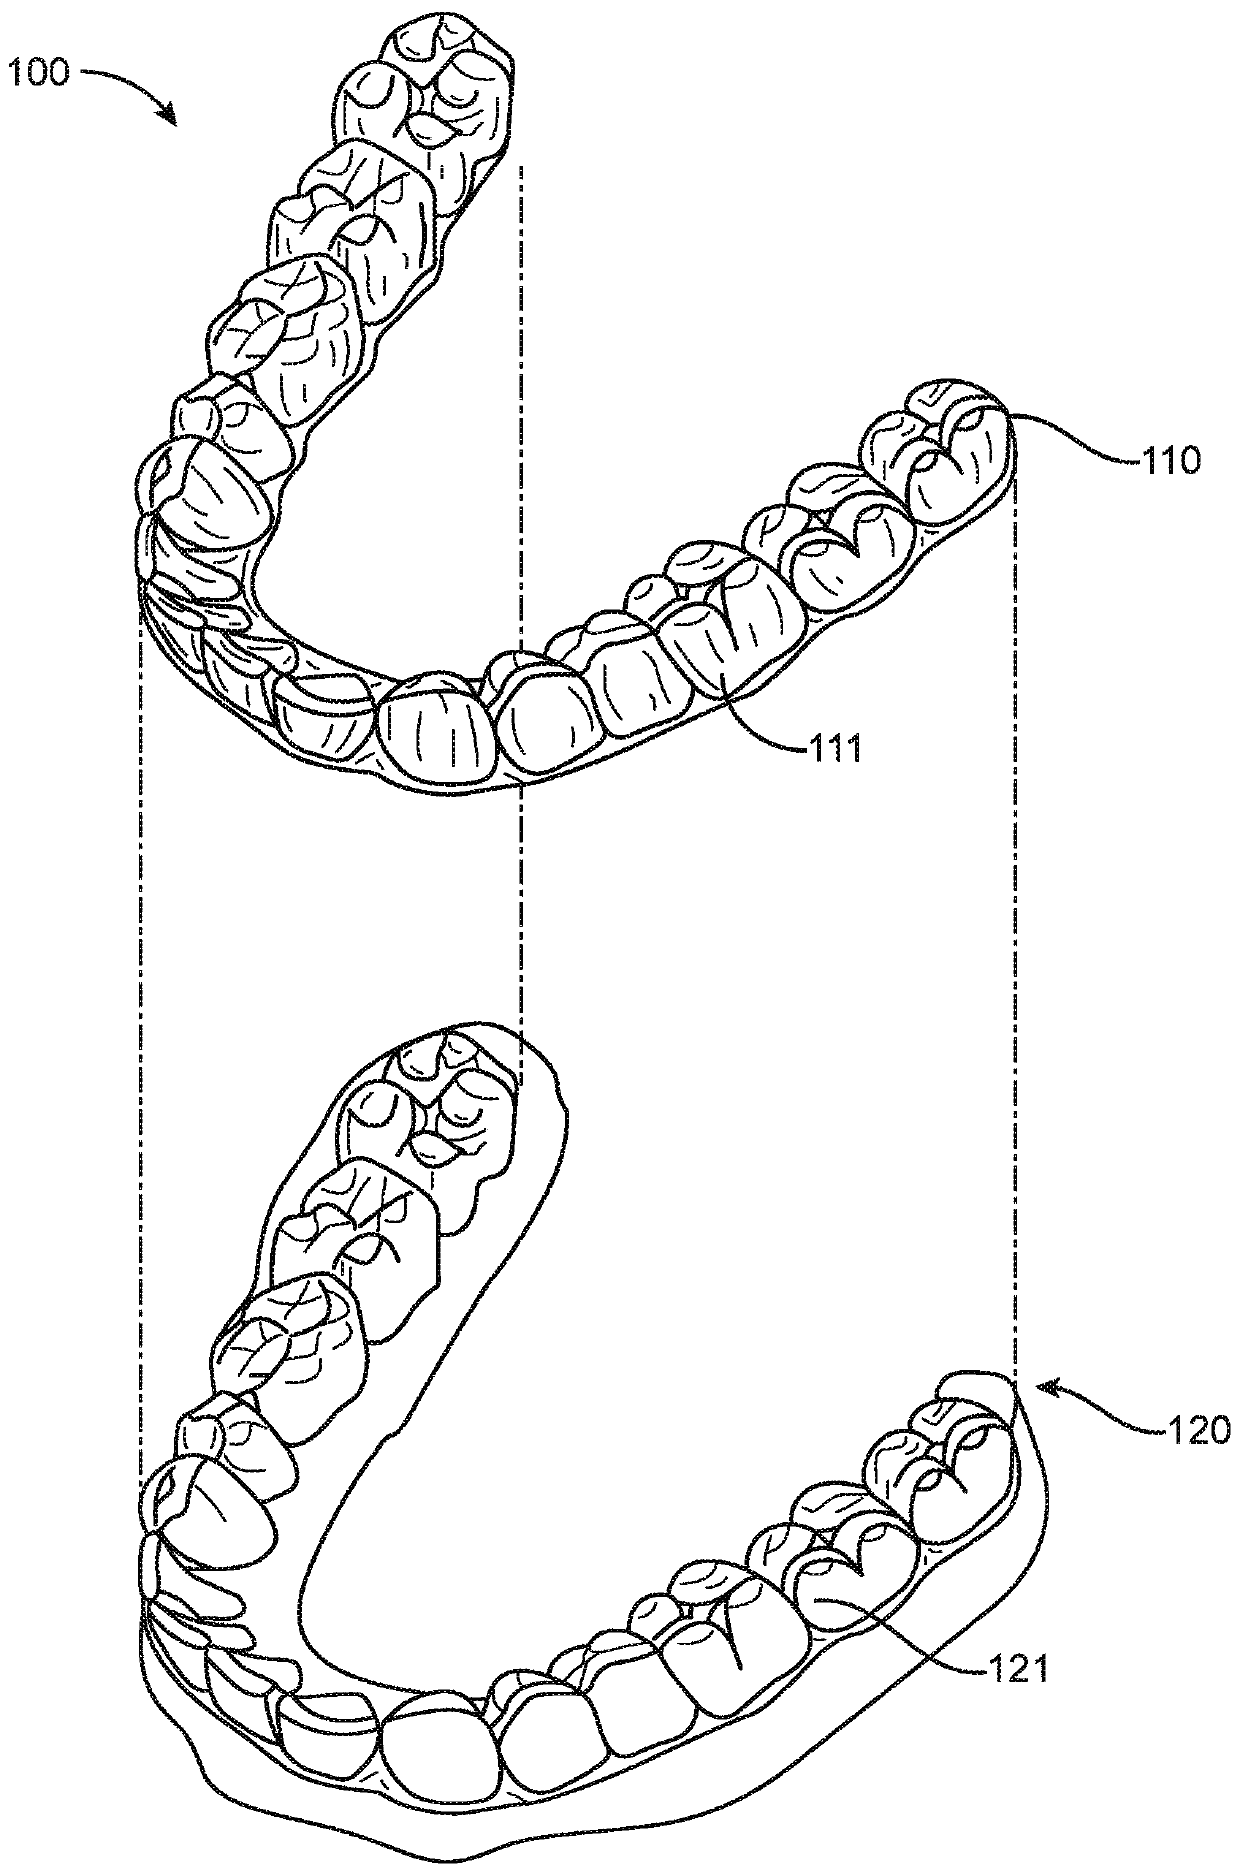 Systems, methods, and apparatus for correcting malocclusions of teeth